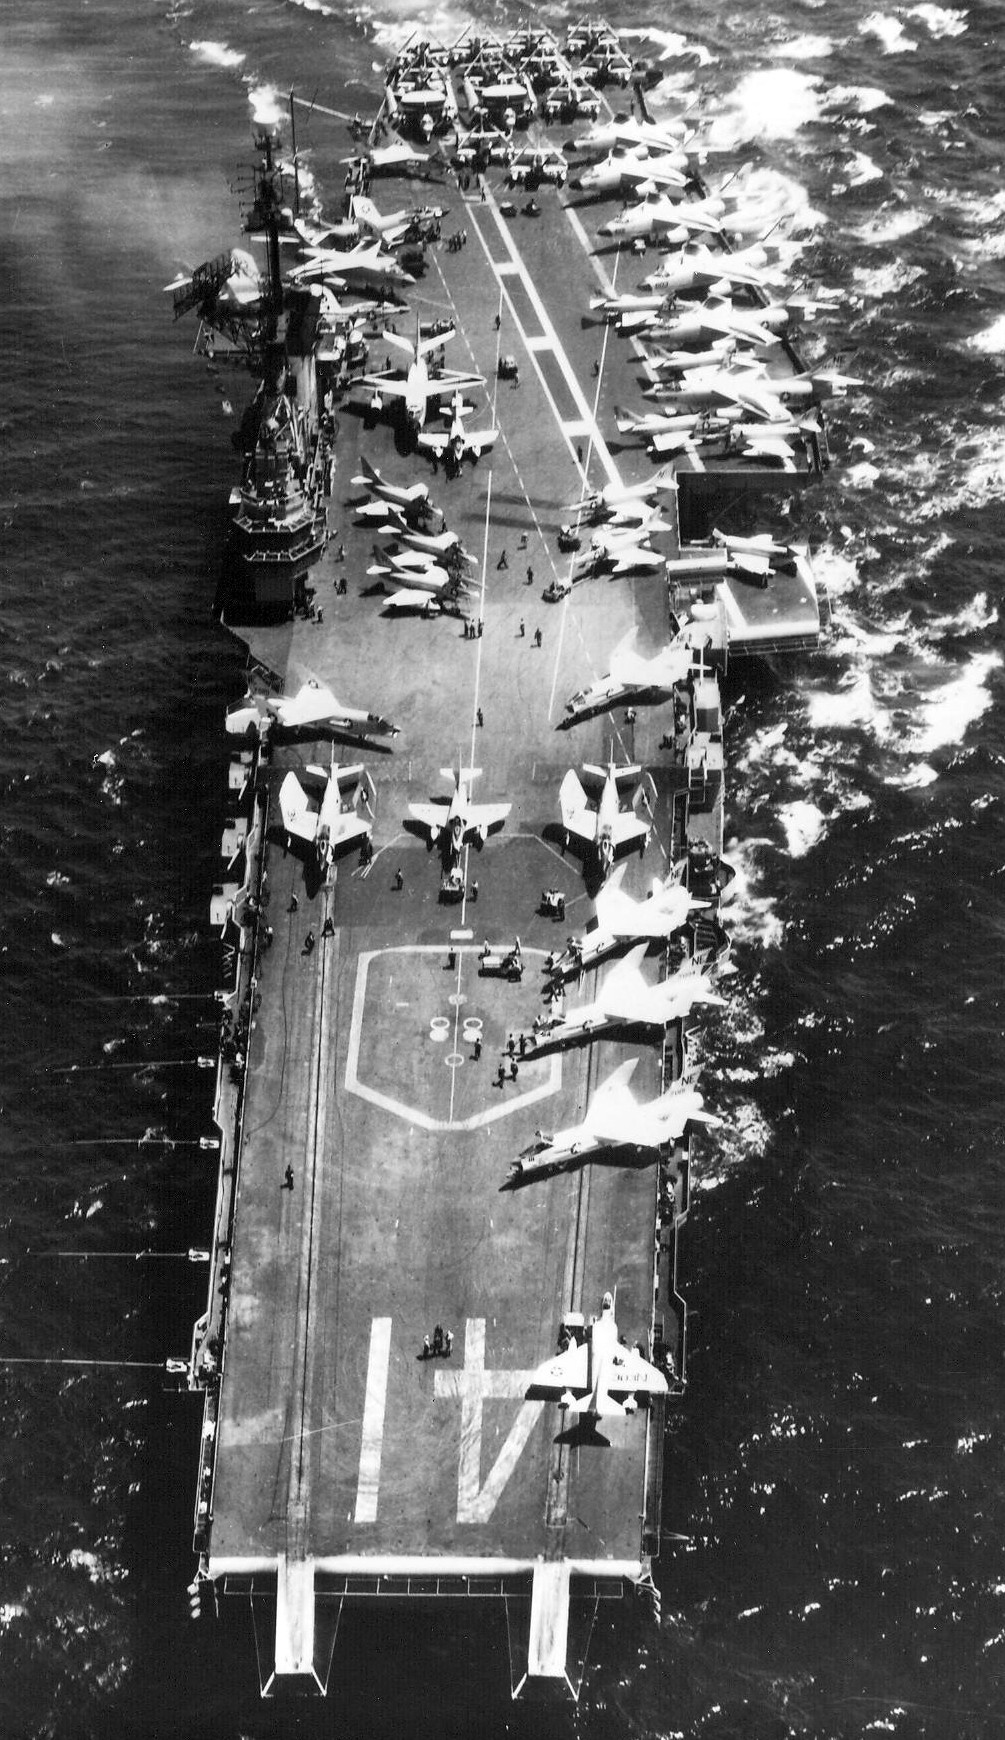 cvg-2 carrier air group us navy uss midway cva-41 embarked squadrons 05